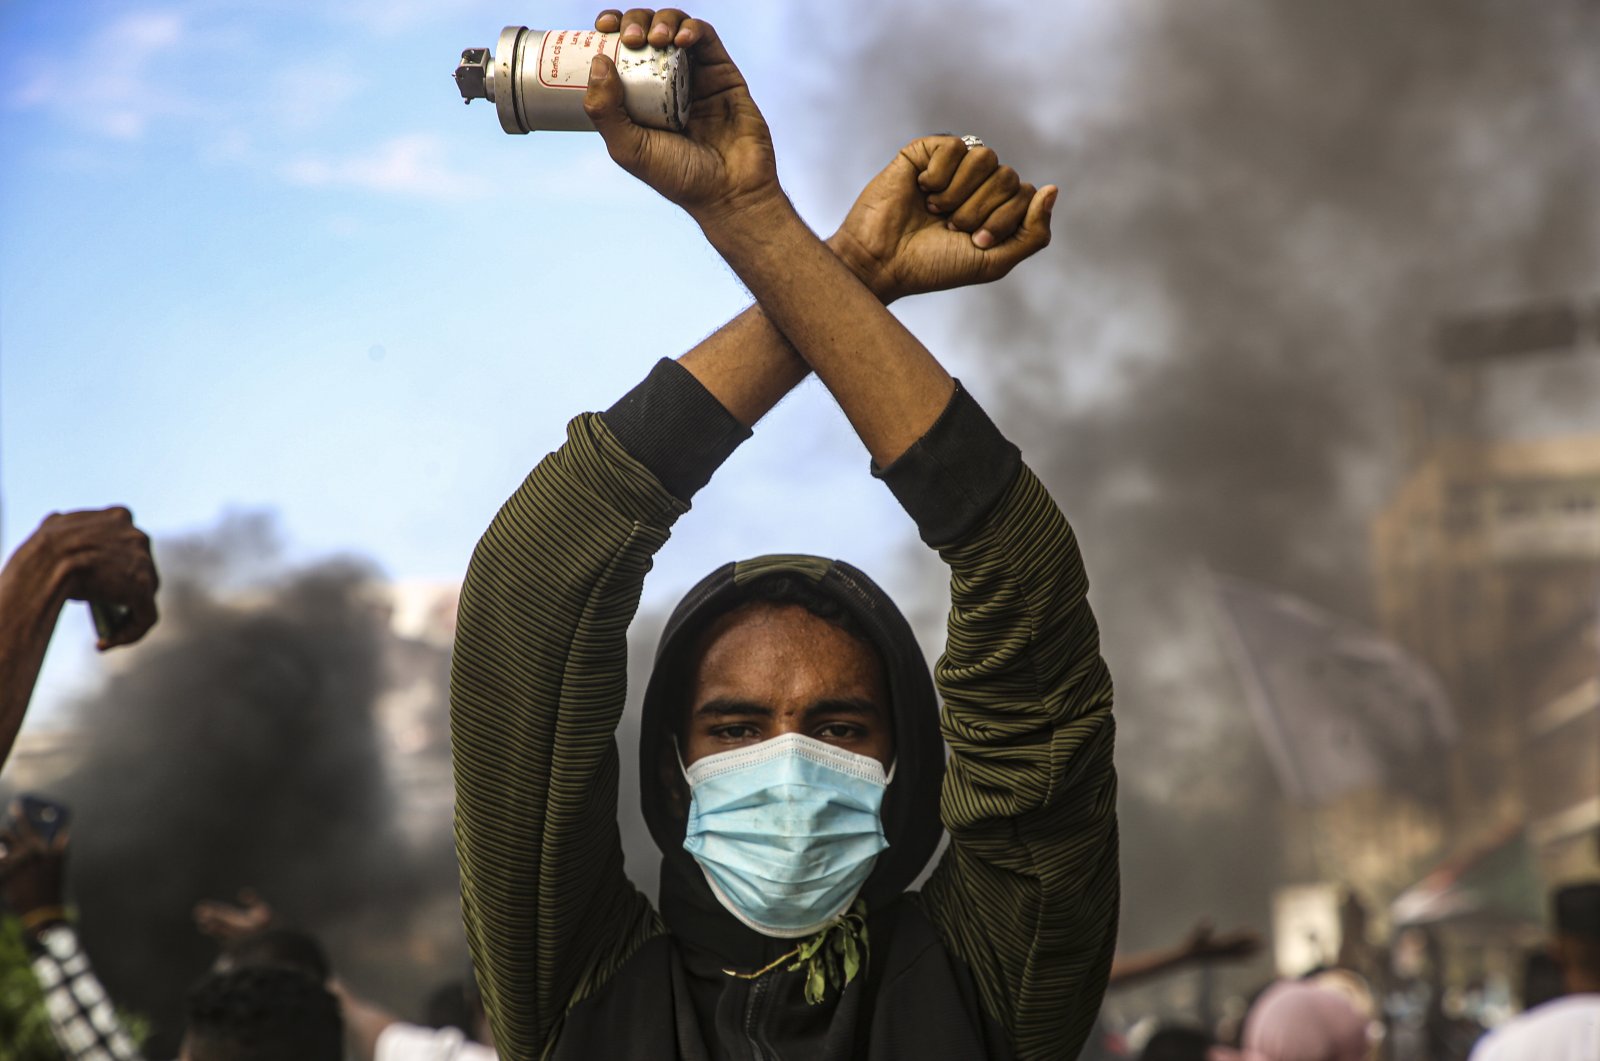 Sudanese protesters clash with security forces during an anti-coup protest near the presidential palace in the capital Khartoum, Sudan, Dec. 25, 2021. (EPA Photo)